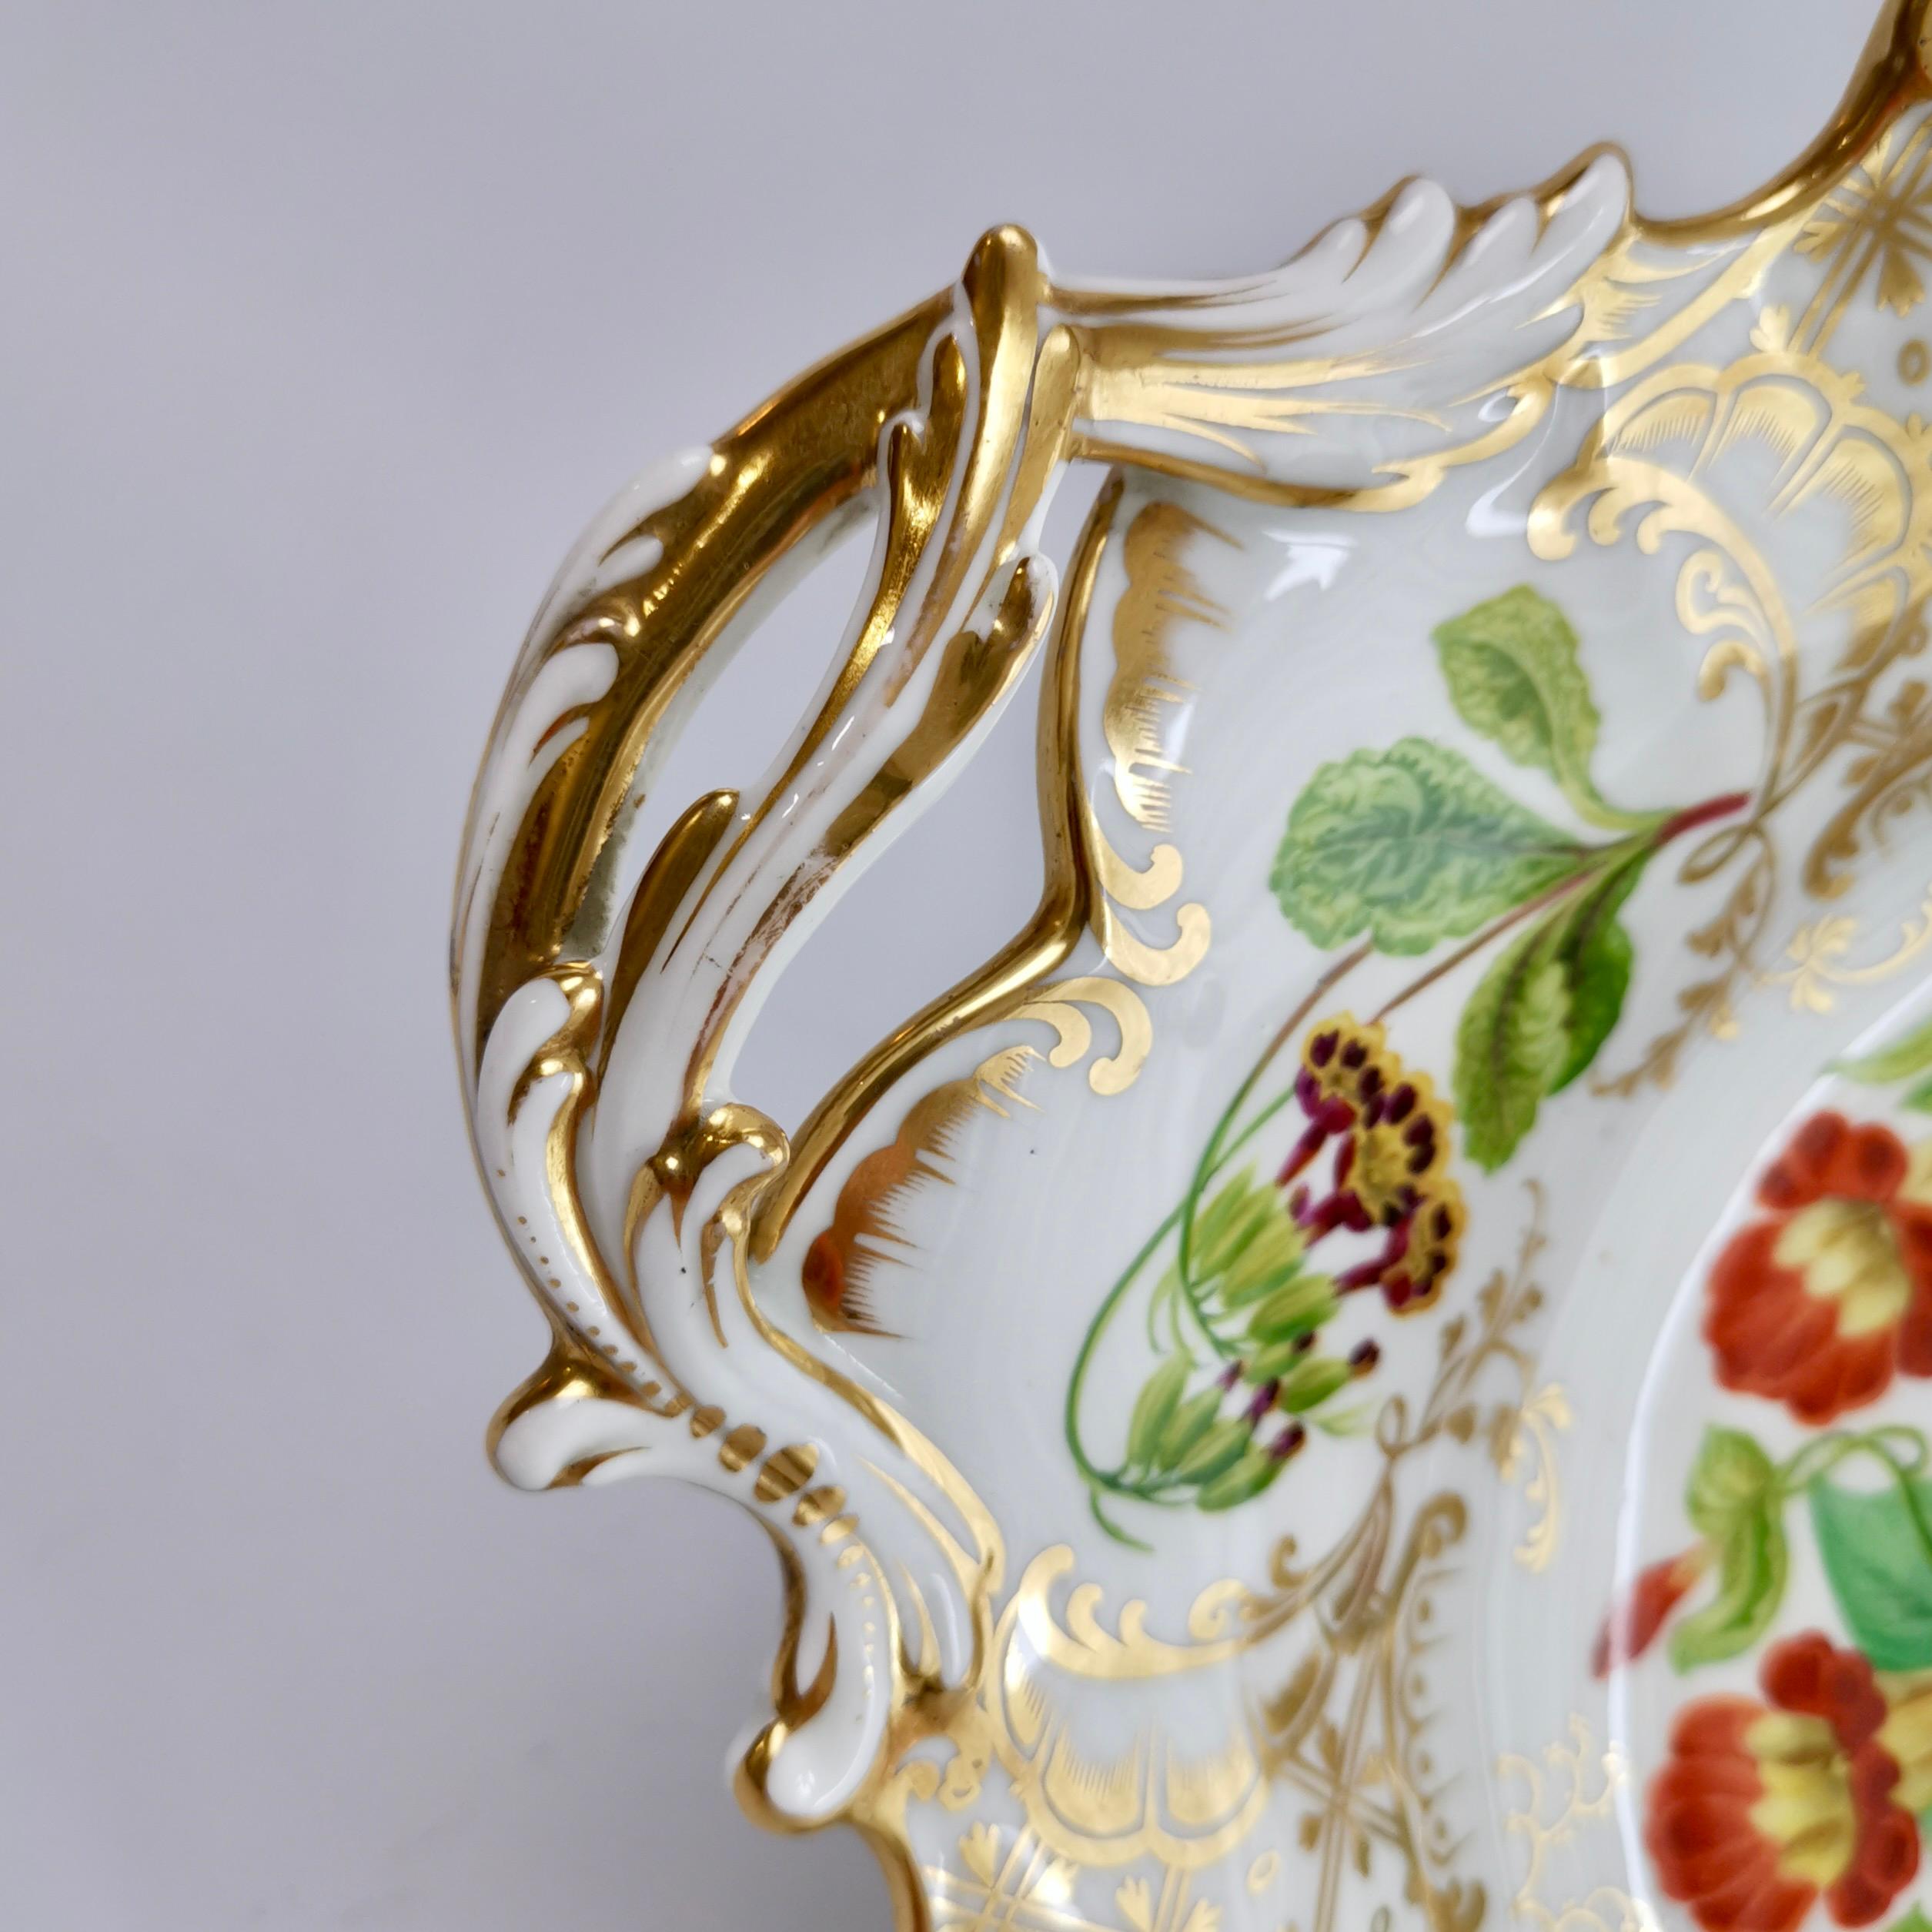 Hand-Painted Ridgway High Footed Porcelain Dessert Comport, Sublime Flowers, Gilt, 1845-1850